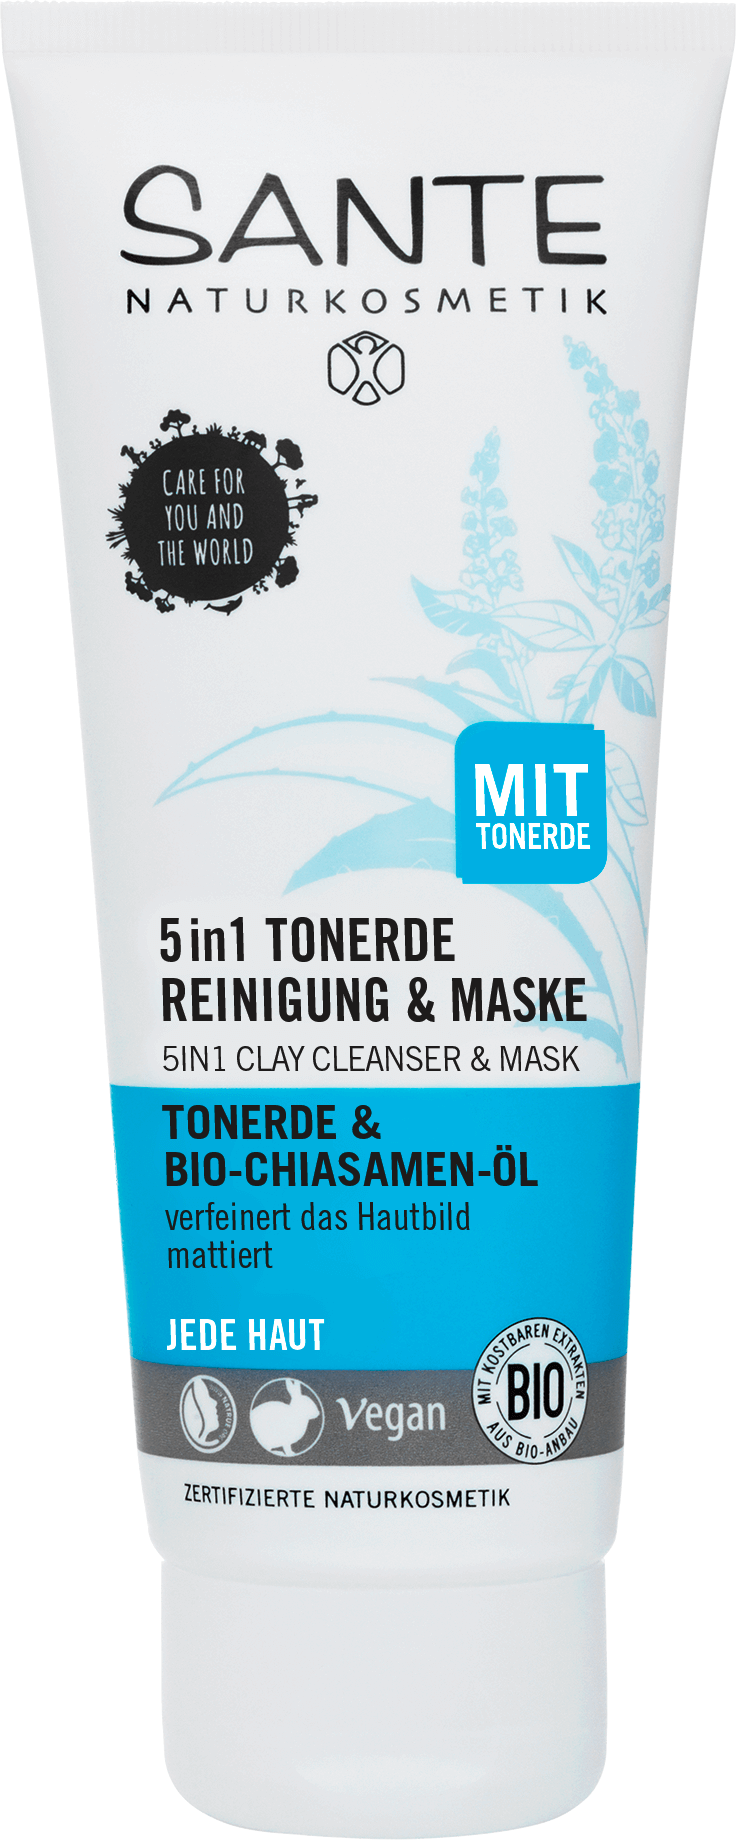 Sante Naturkosmetik5in1 Clay Cleanserand Mask PNG image